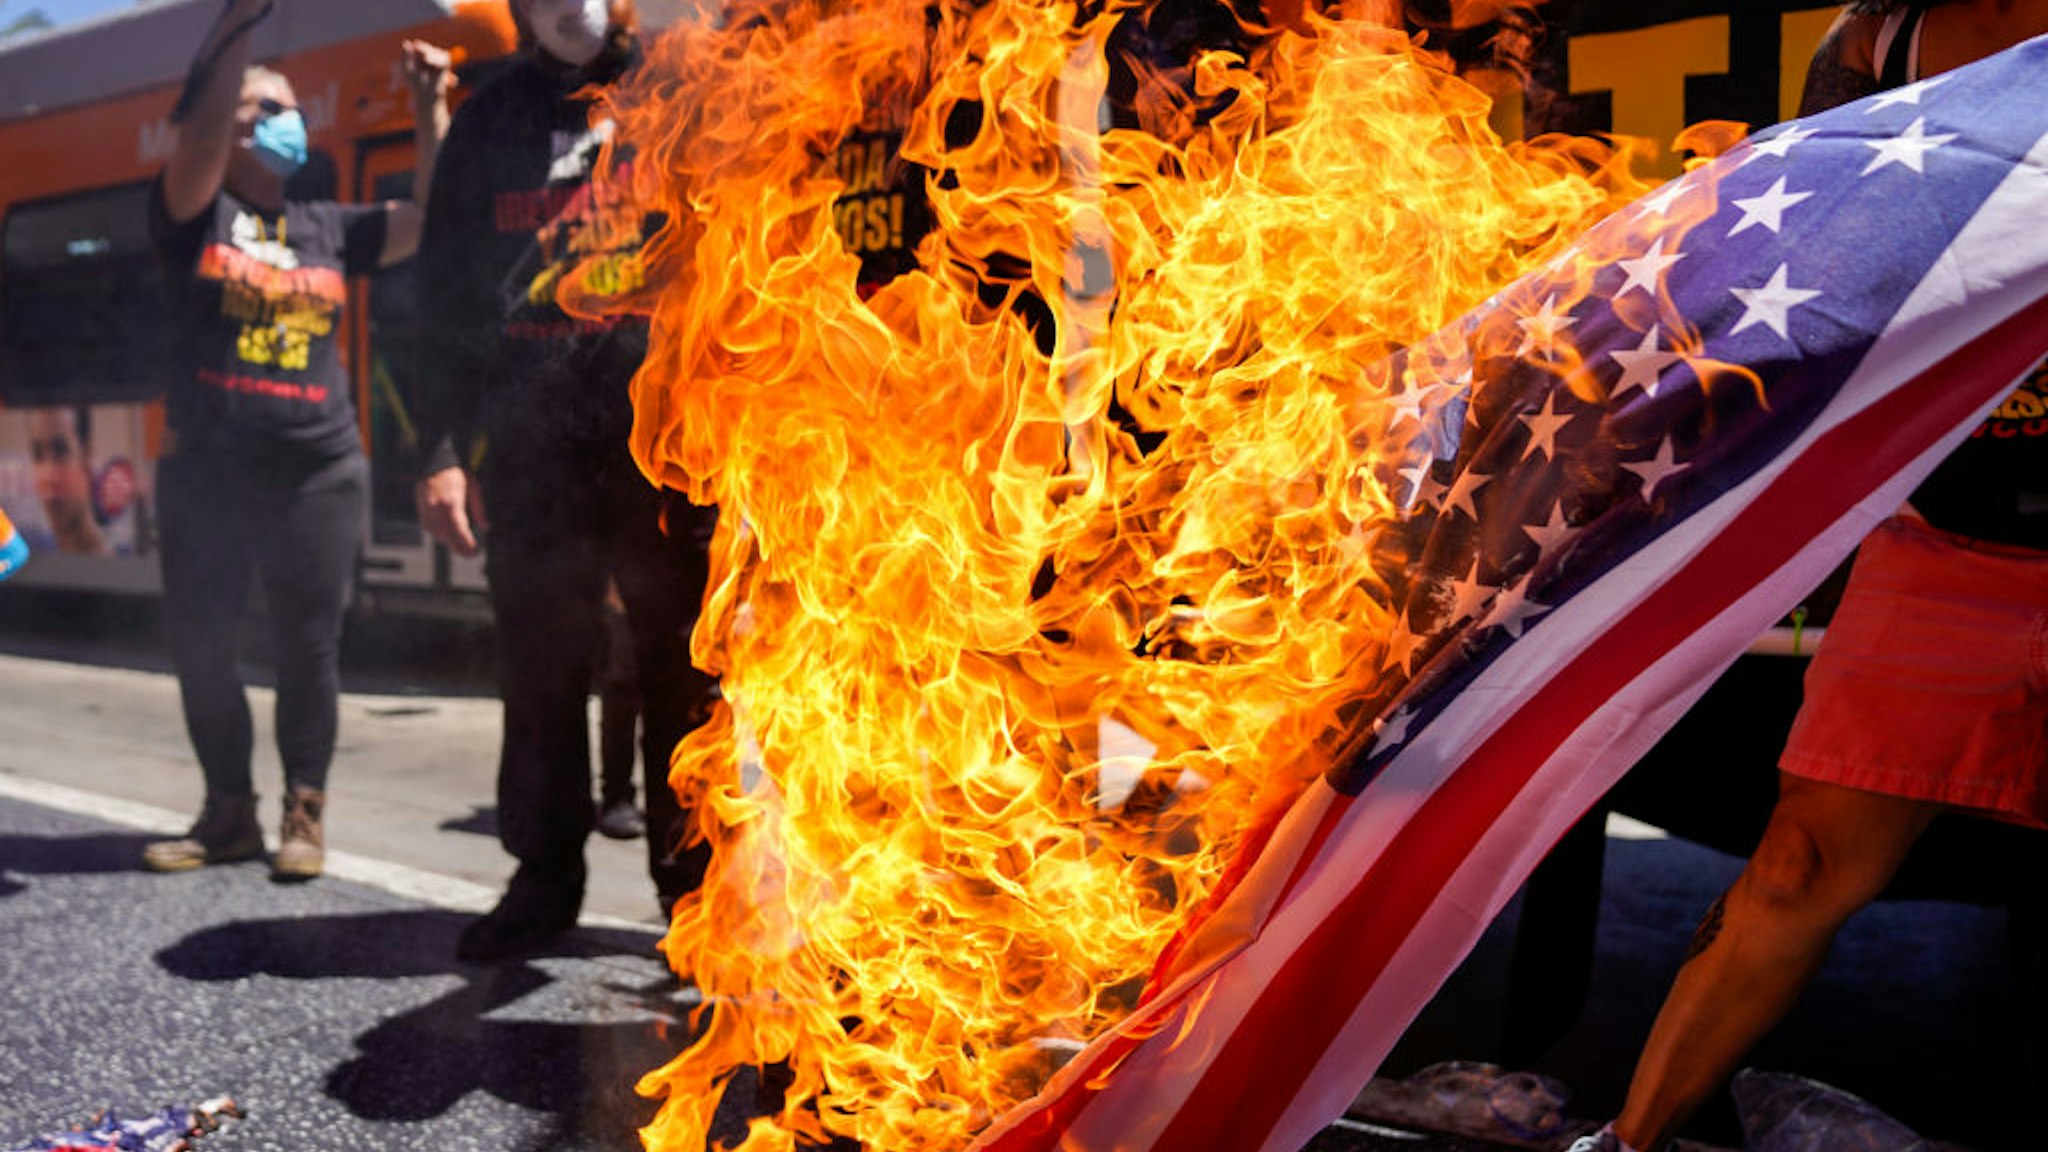 Protesters set fire to an American flag near President Donald Trumps Star on the Hollywood Walk of Fame, part of the Demonstrate How to Dishonor the American Flag event put on by the Revolution Club in Los Angeles on Saturday, July 4, 2020 in Los Angeles, CA. The event was led by Activist Gregory `Joey' Johnson will burn the U.S. flag to protest President Donald Trump's call to re-criminalize flag burning. (Kent Nishimura / Los Angeles Times via Getty Images)